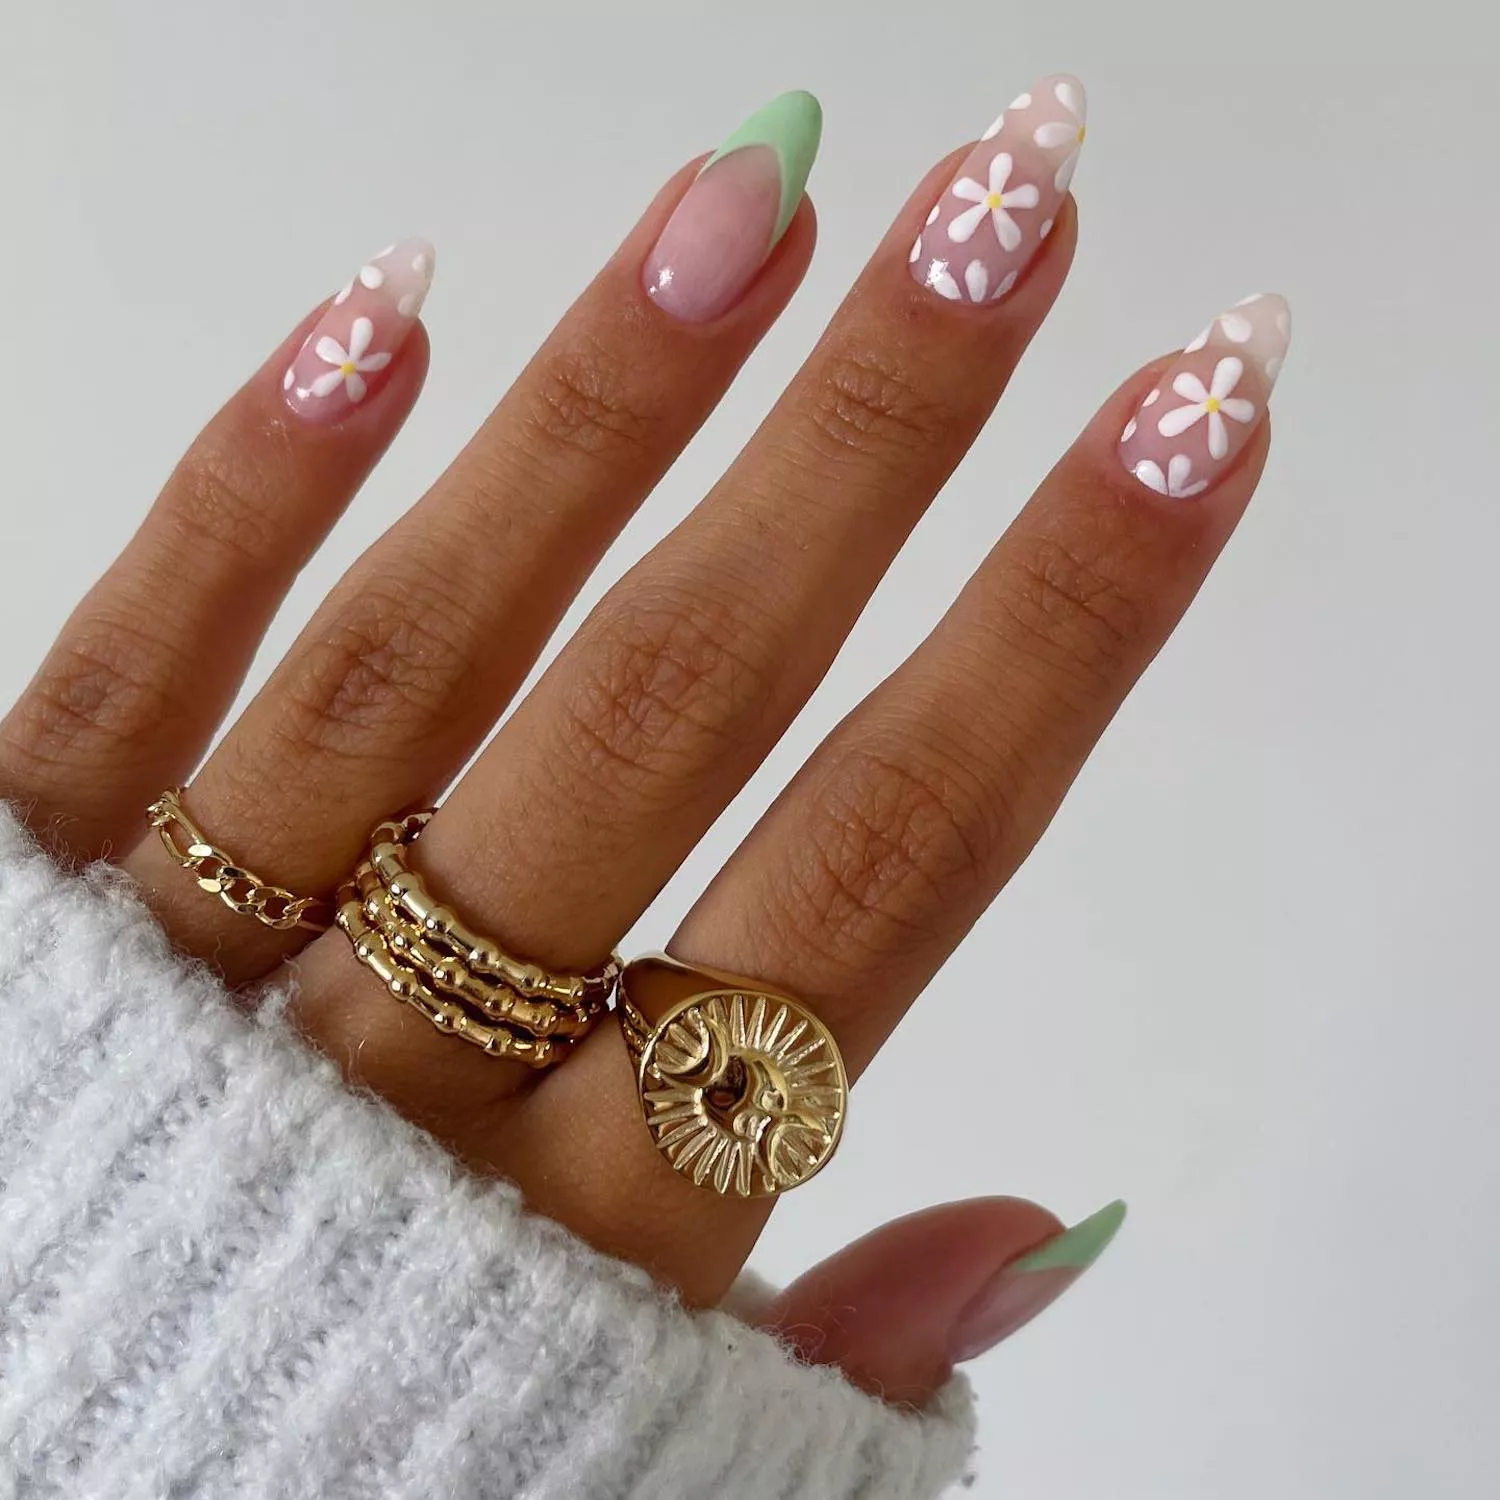 White retro floral manicure on negative space background with light green accent French tips